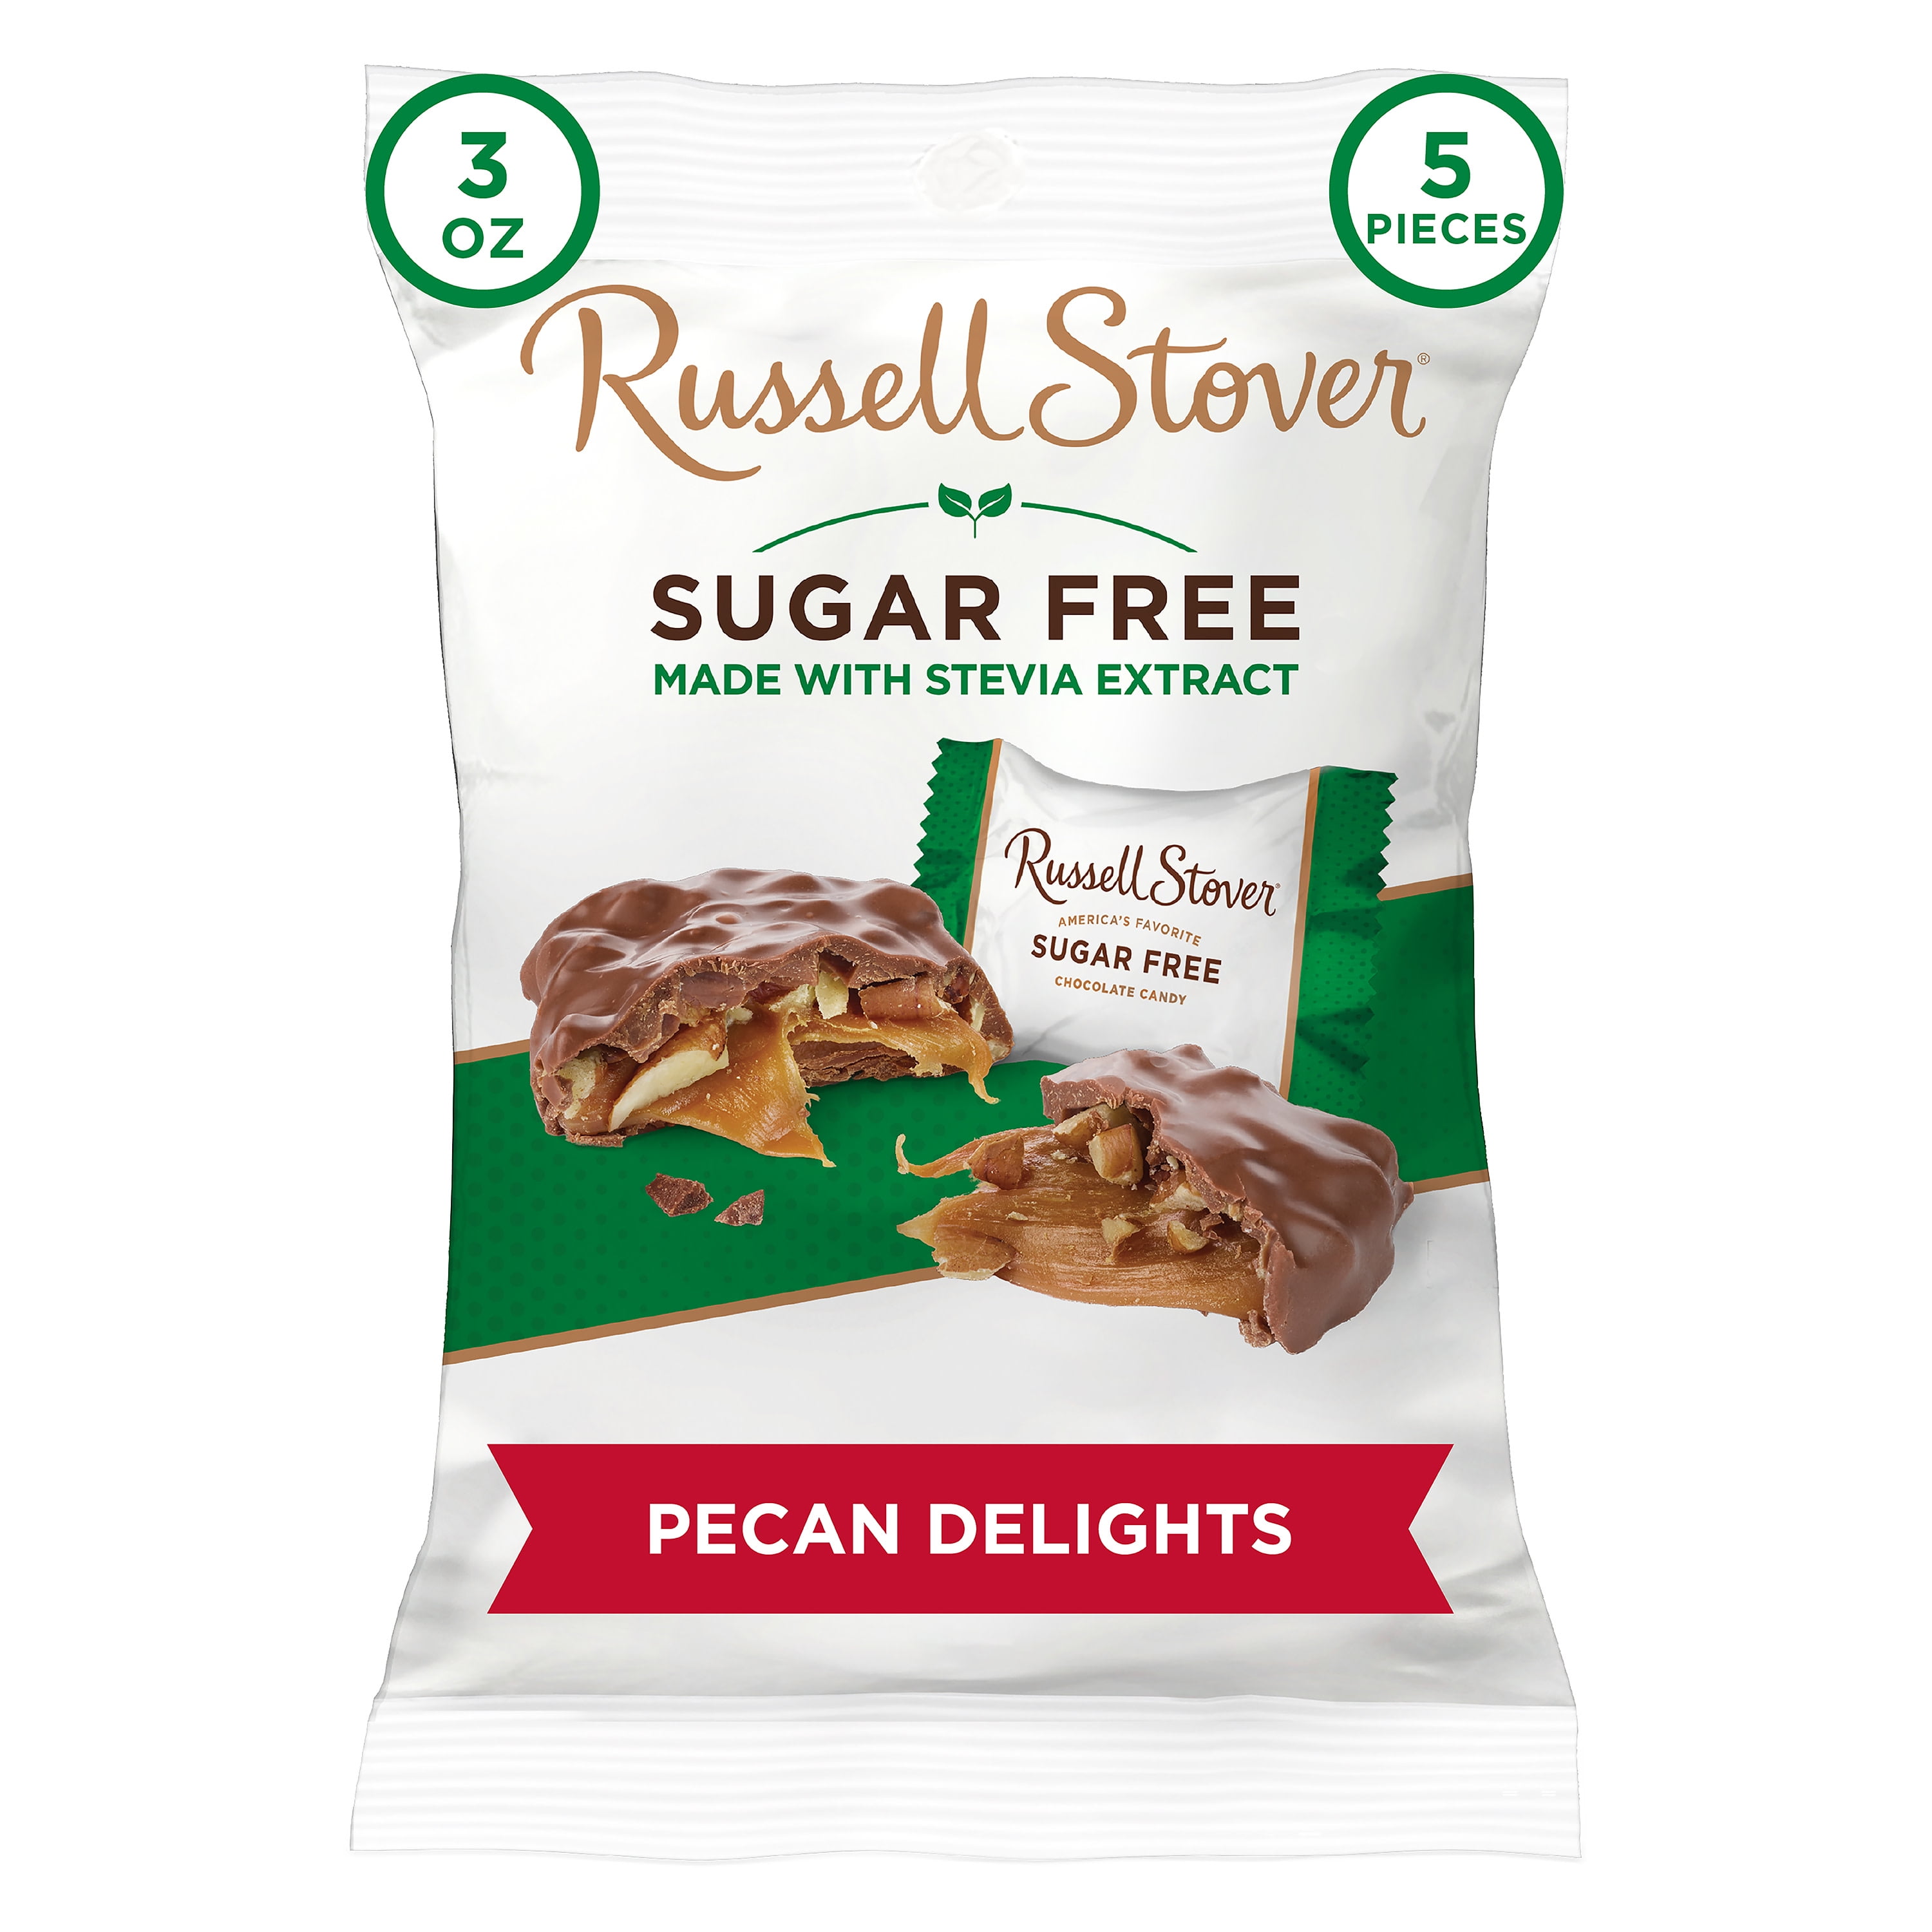 Russell Stover Sugar Free Milk Chocolate Pecan Delights with Stevia, 3 oz. Bag